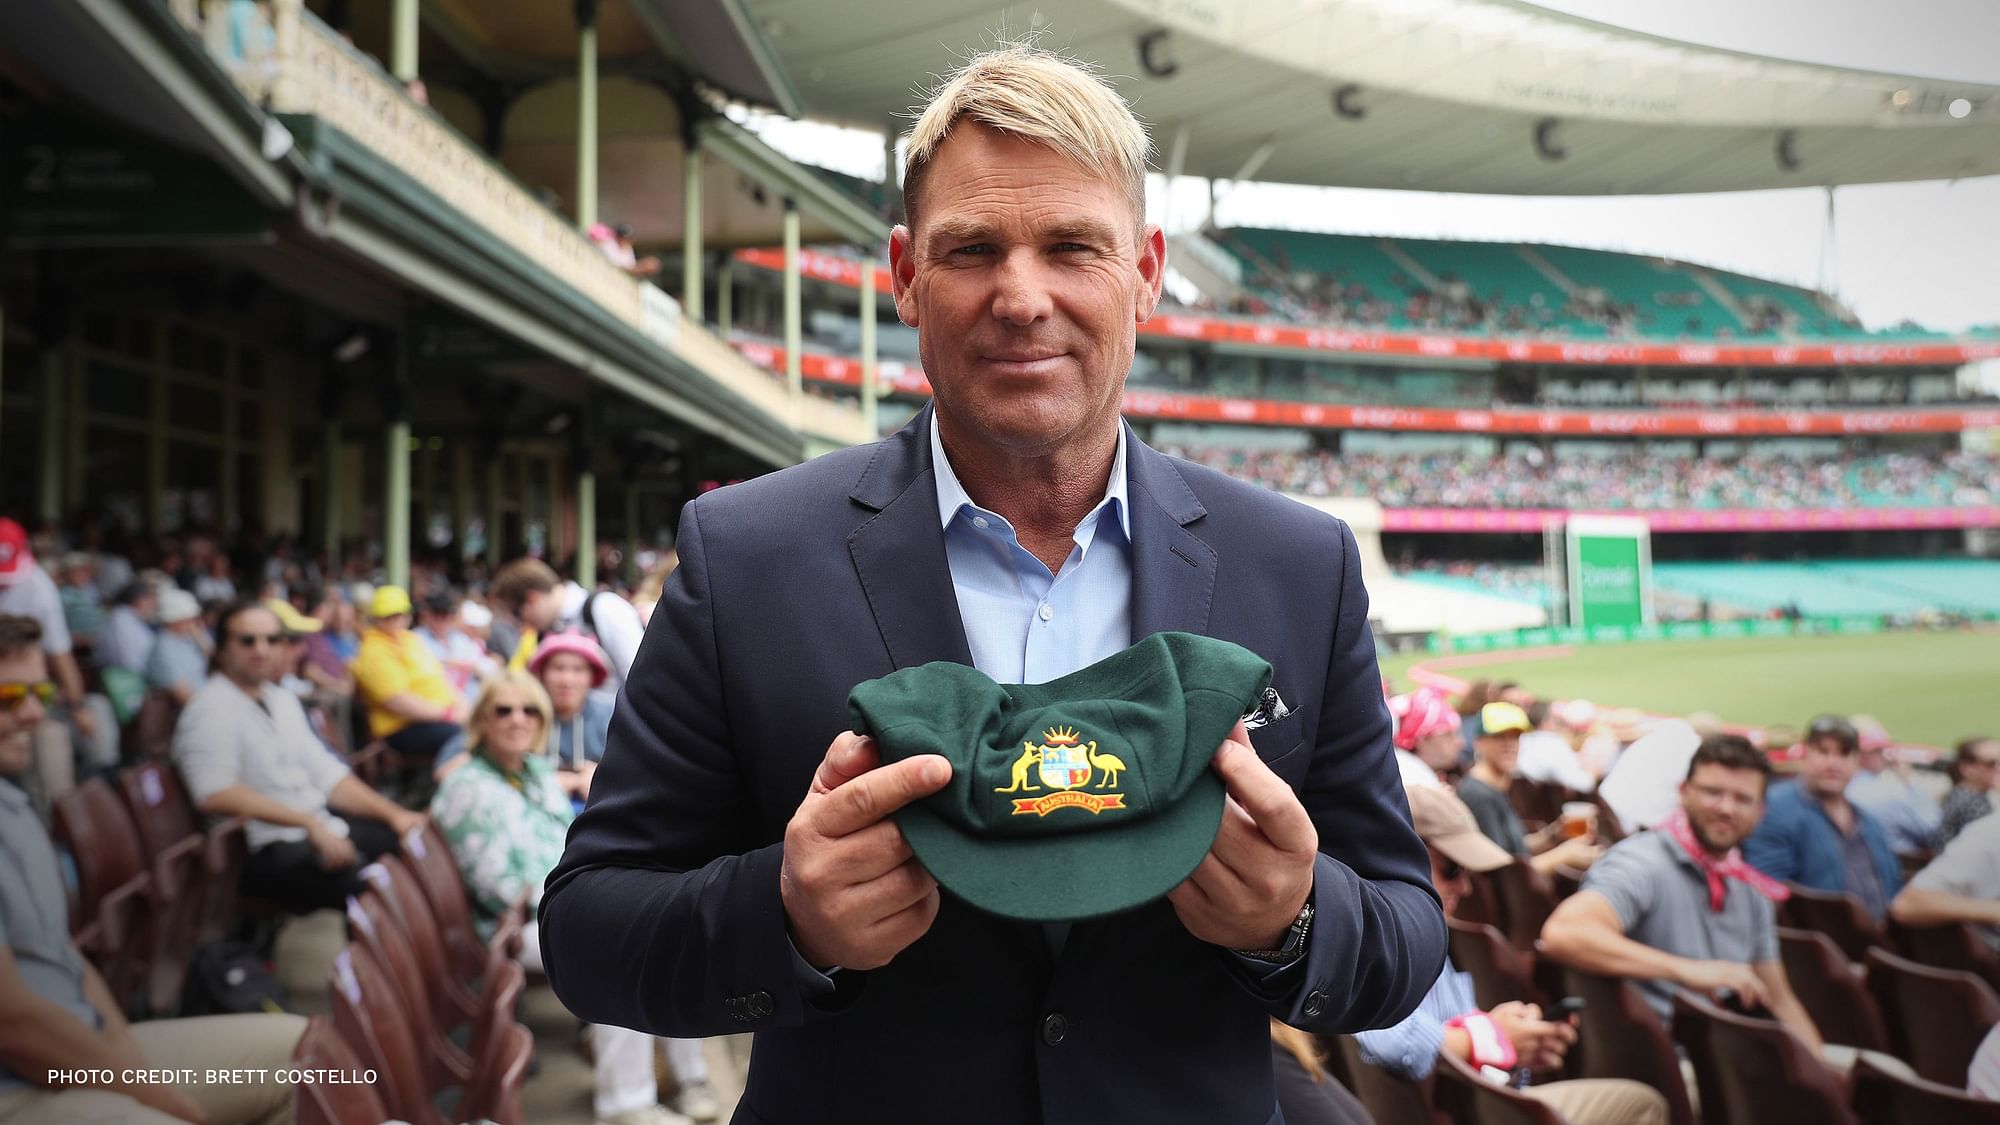 Within two hours of bidding, Shane Warne’s iconic cap fetched $275,000.